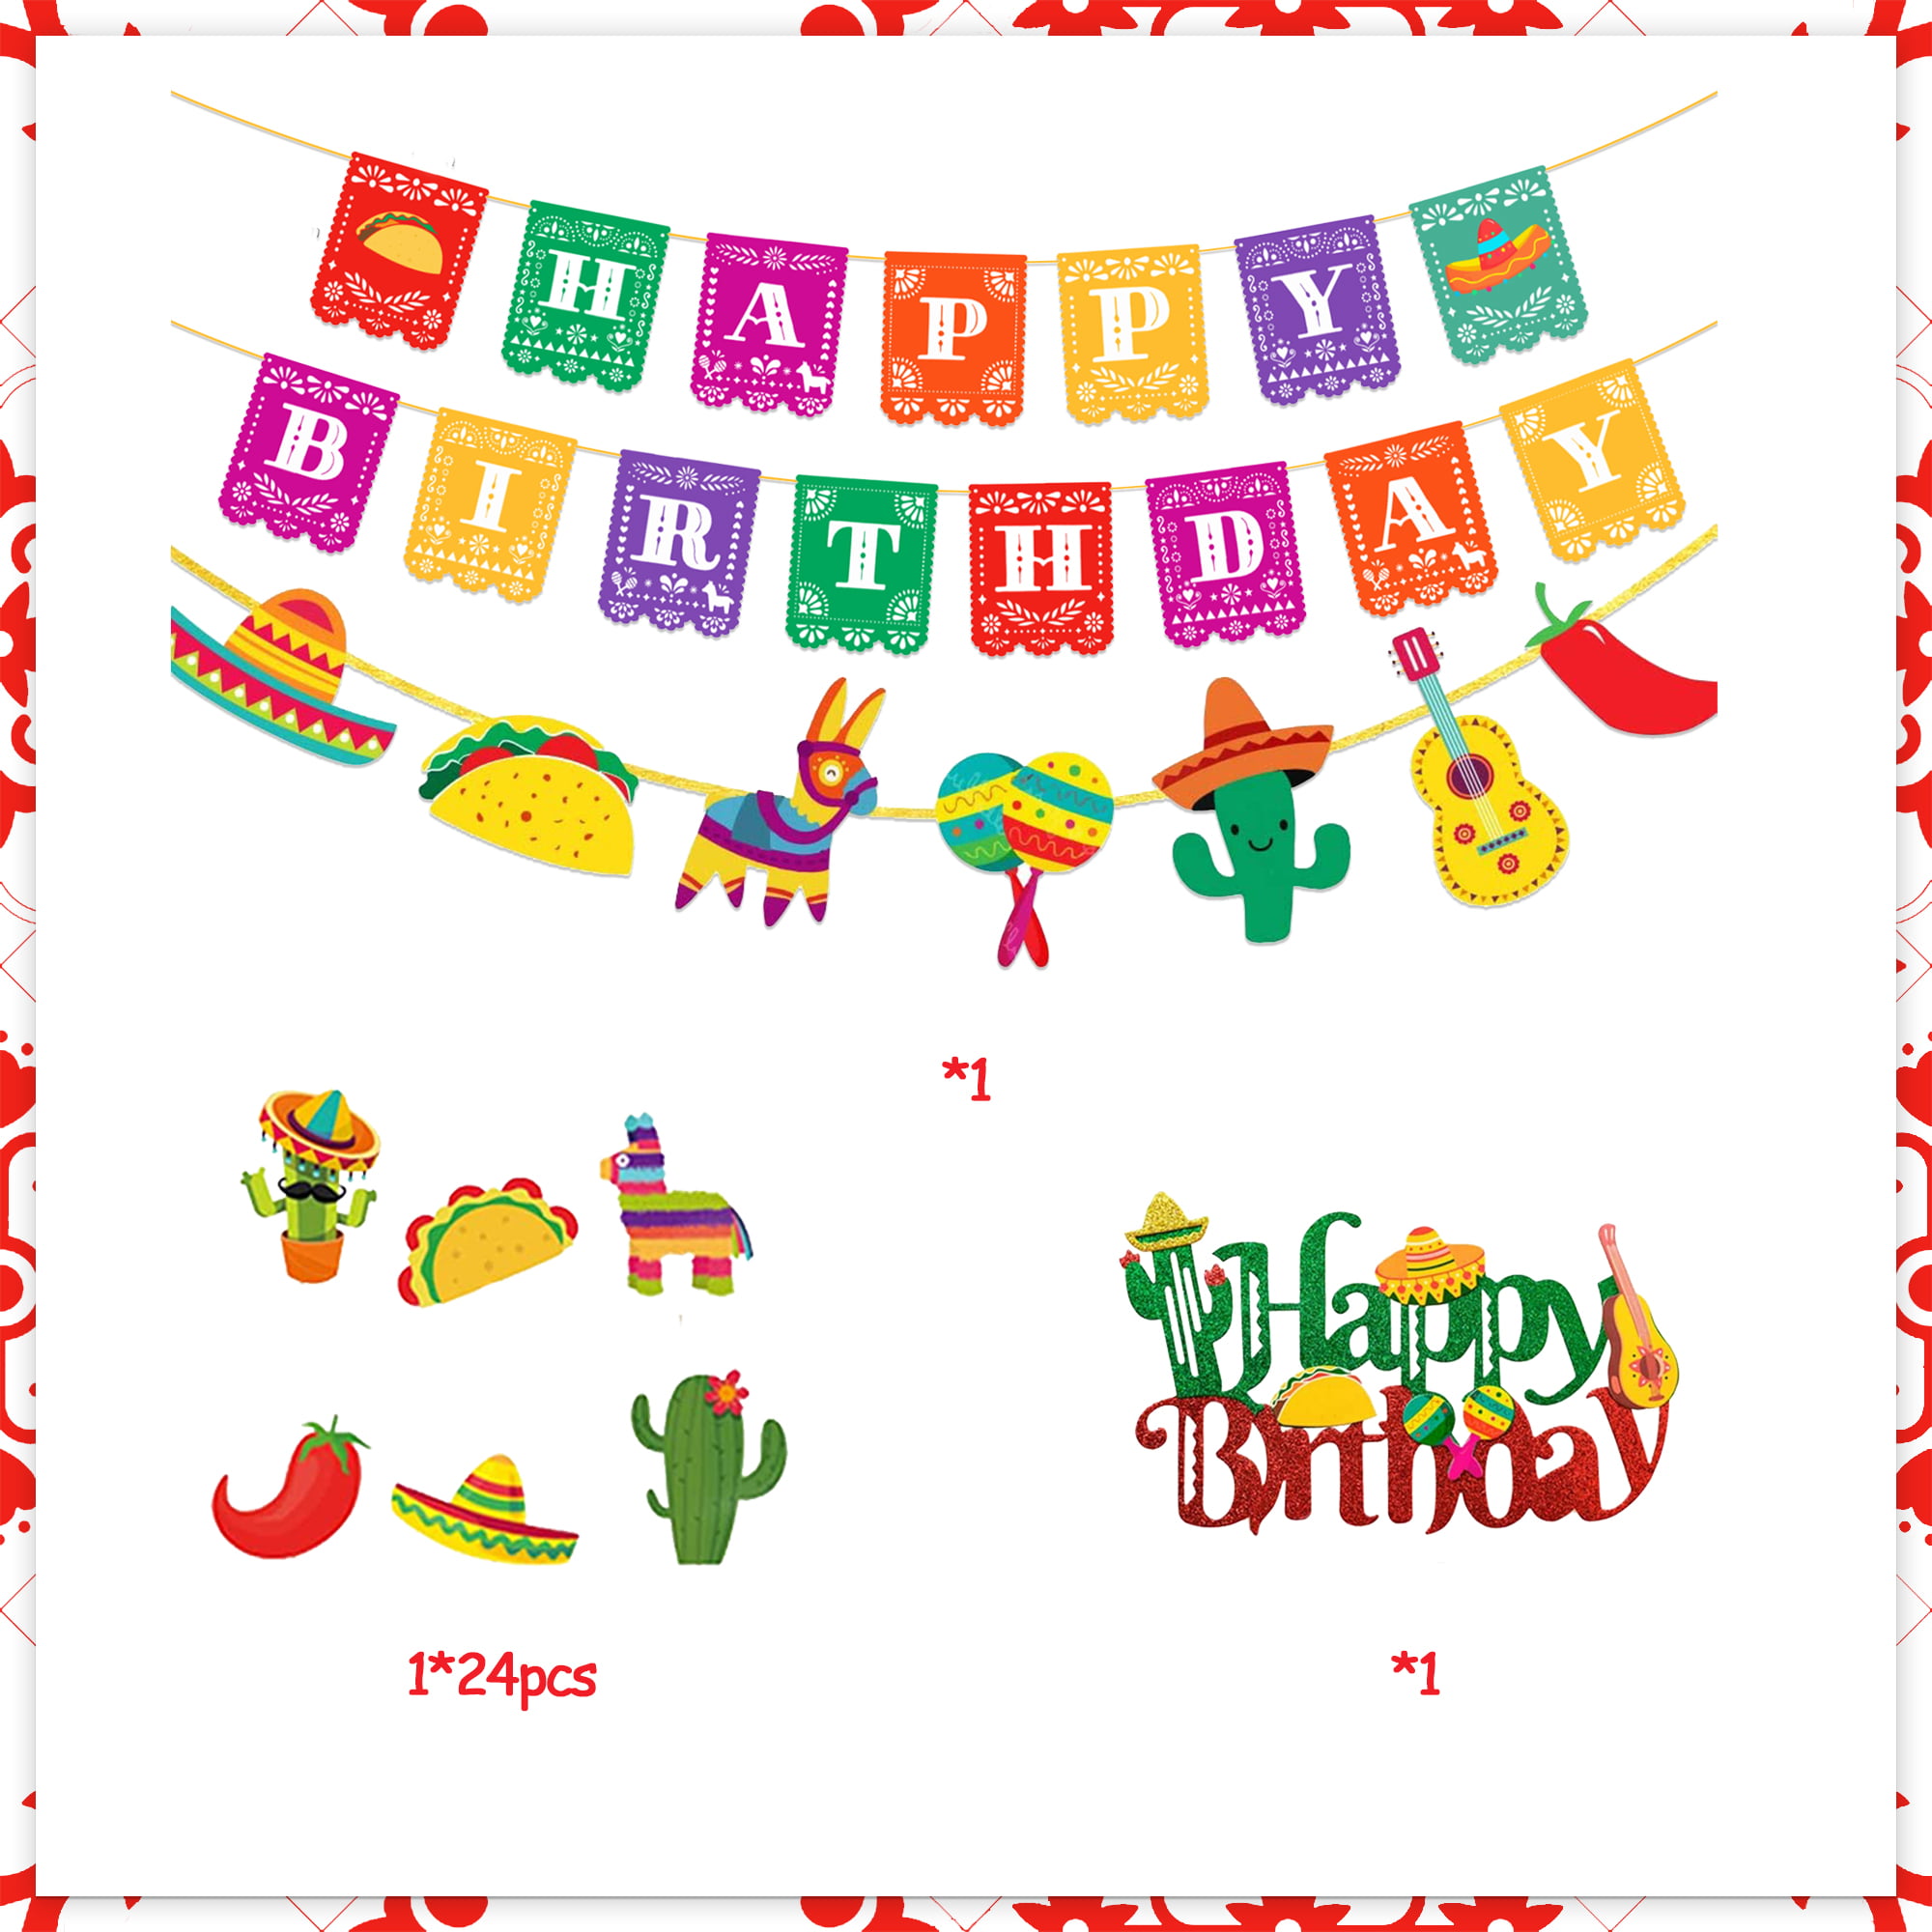 8PCS Fiesta Party Decorations, Cinco de Mayo Mexican Theme Party Supplies  Cactus Llama Balloons,8 Hanging PCS for Taco Tuesday Birthday Luau Party  Supplies 